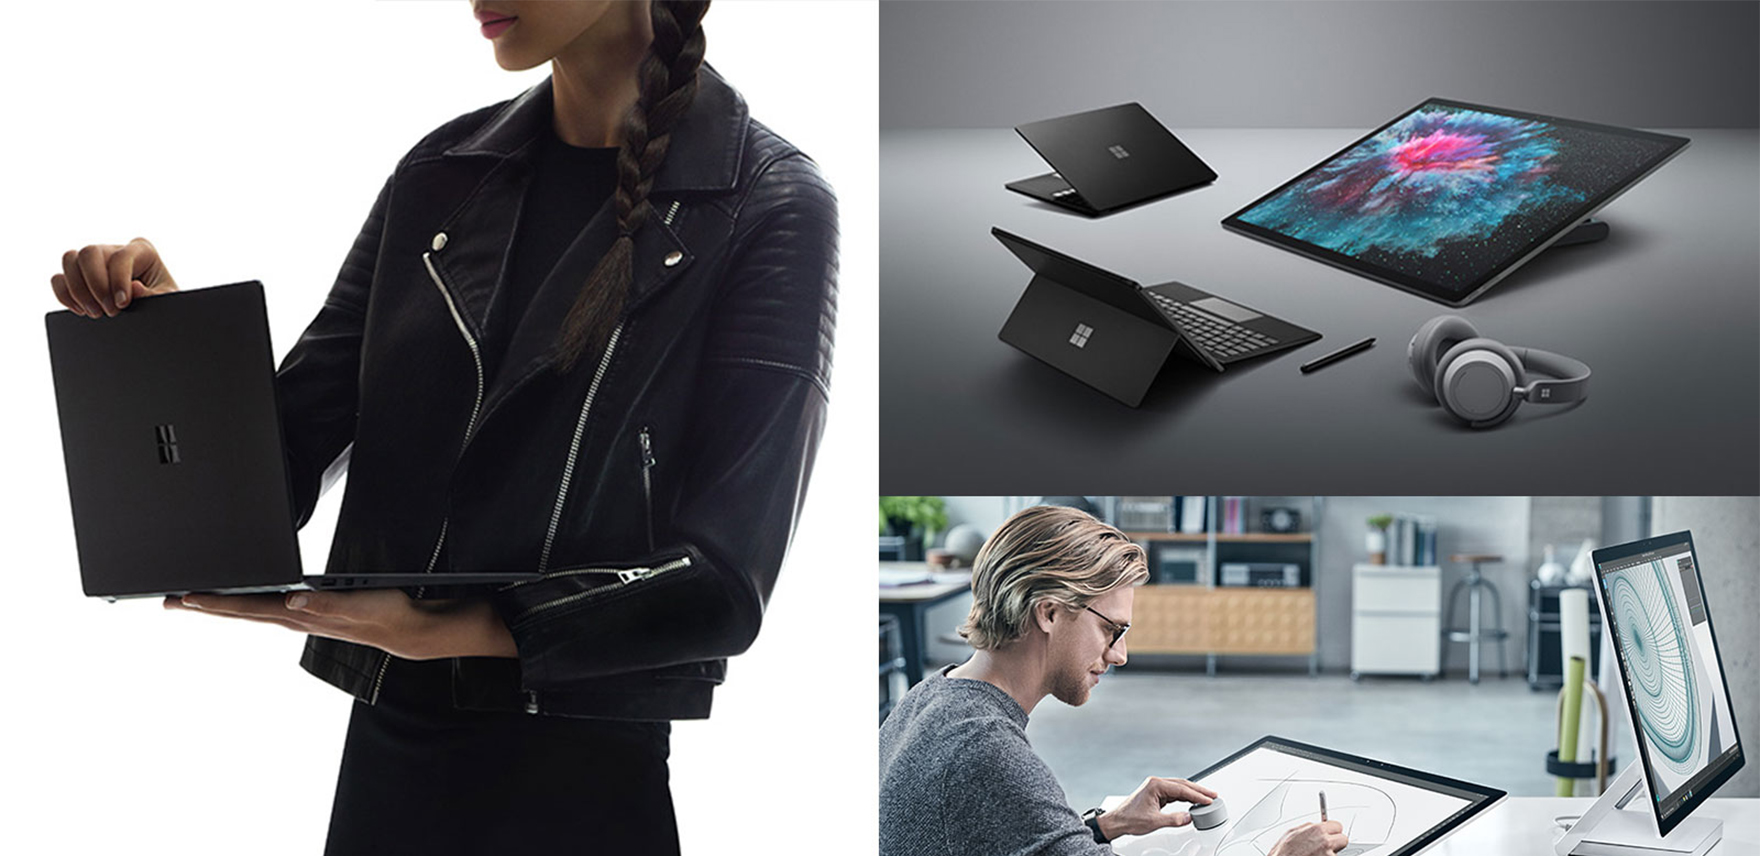 Collage of people and Surface devices